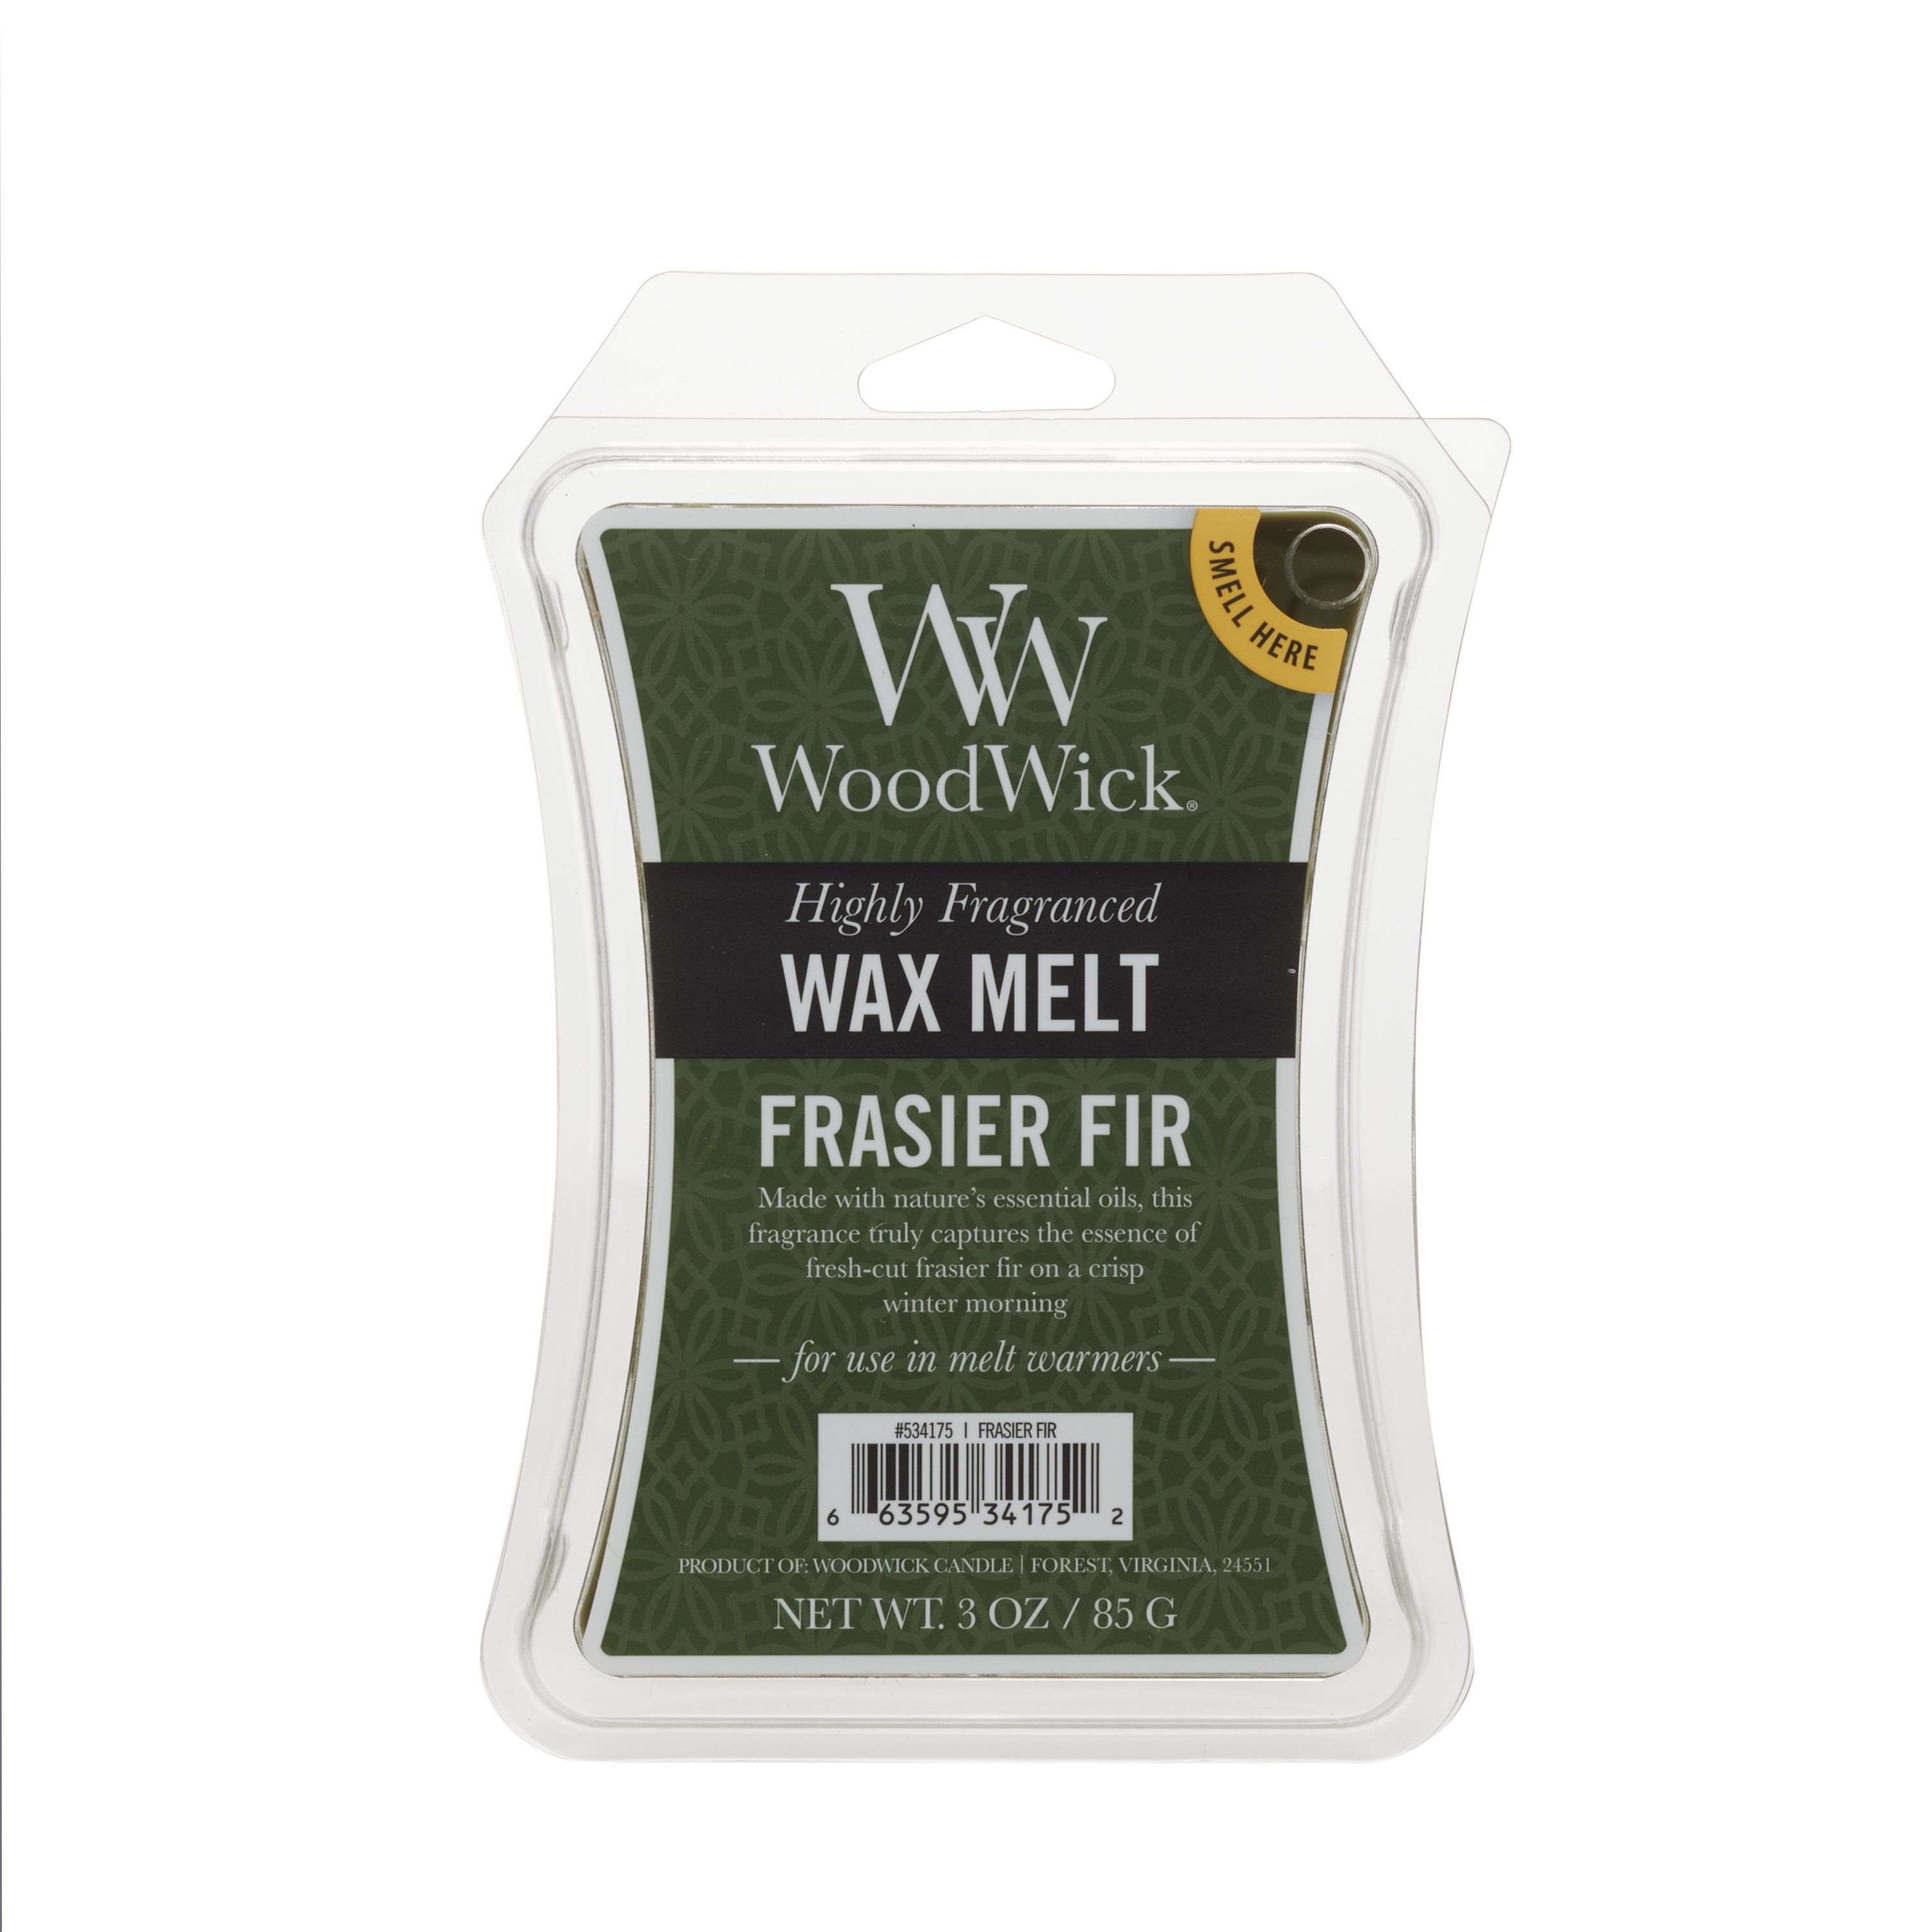 WoodWick Candle Frasier Fir Wax Melt Highly Fragranced Lot Of 3-6 Pack 